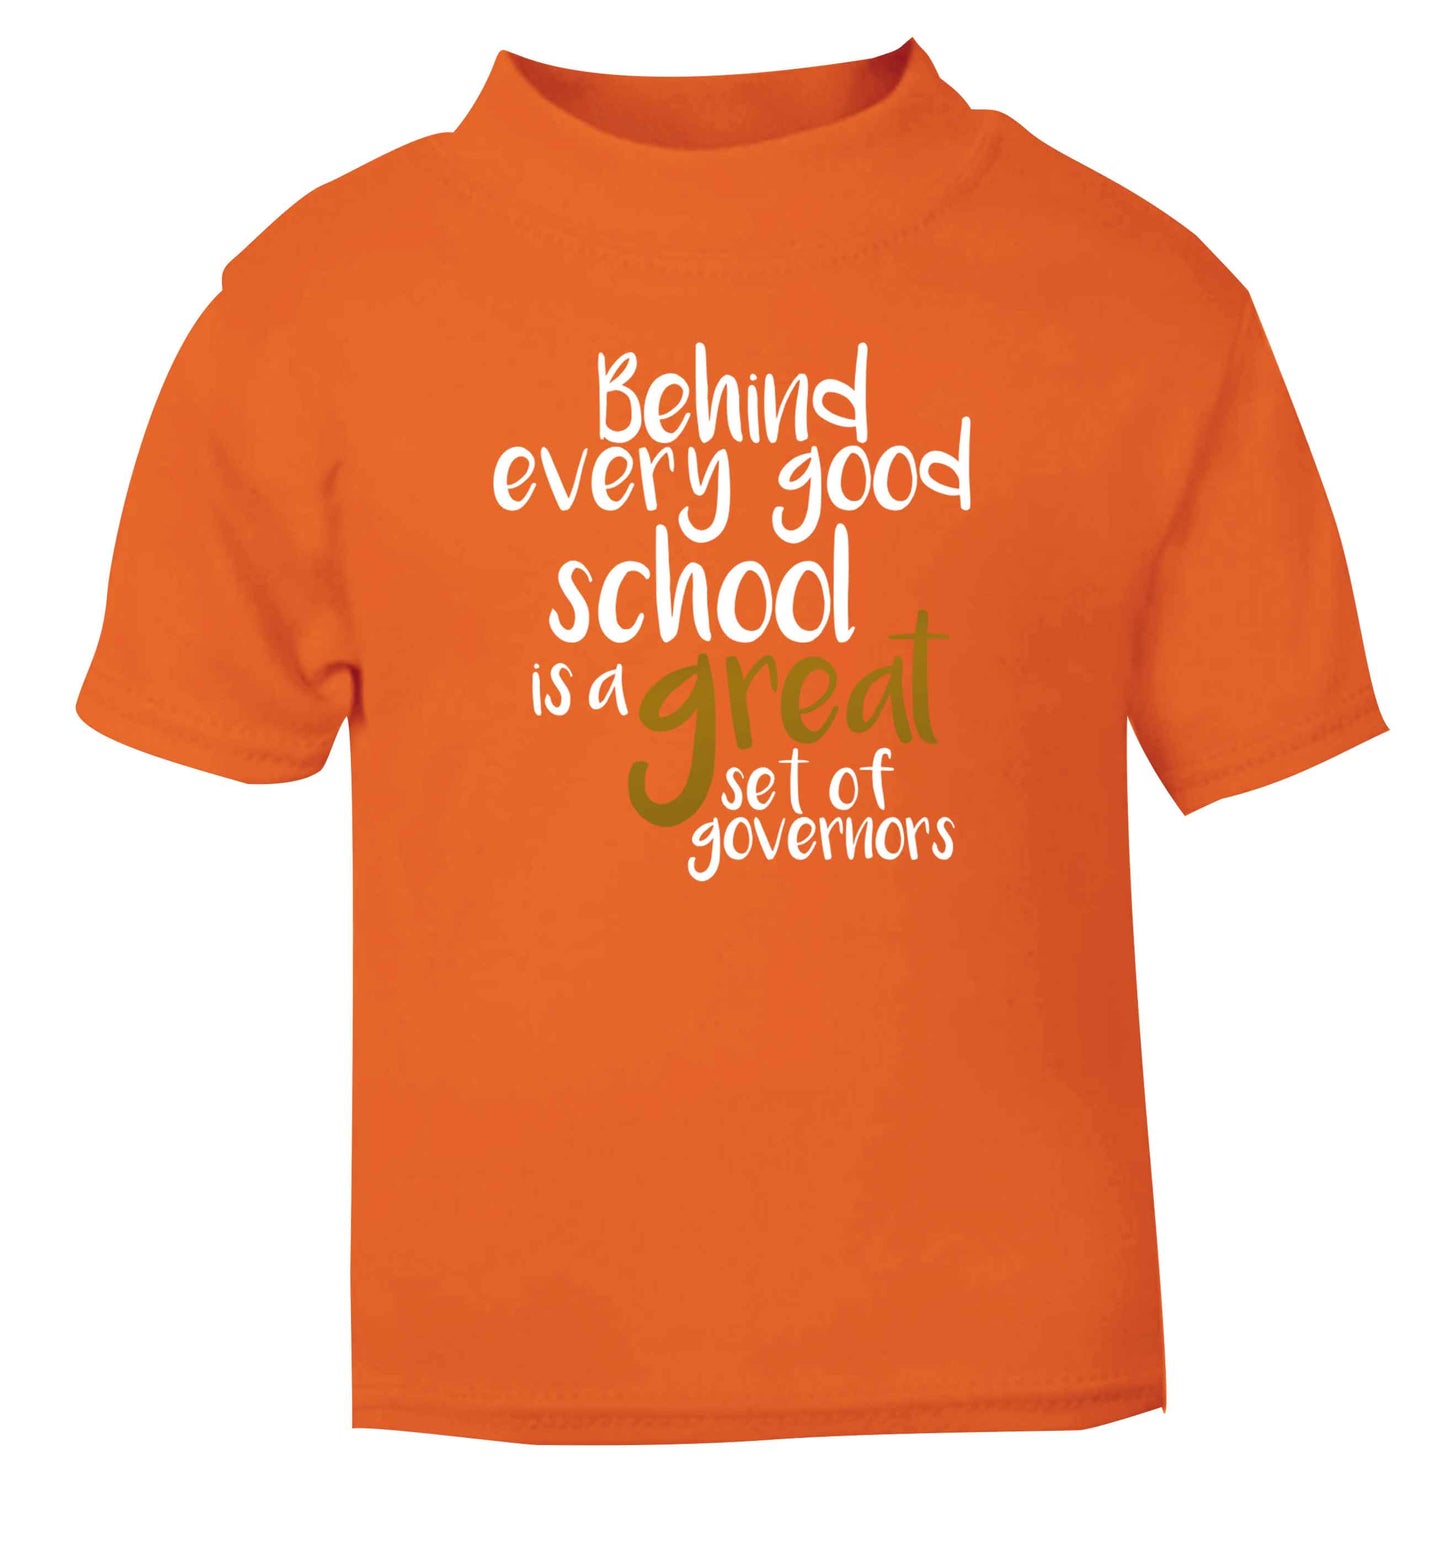 Behind every good school is a great set of governors orange Baby Toddler Tshirt 2 Years